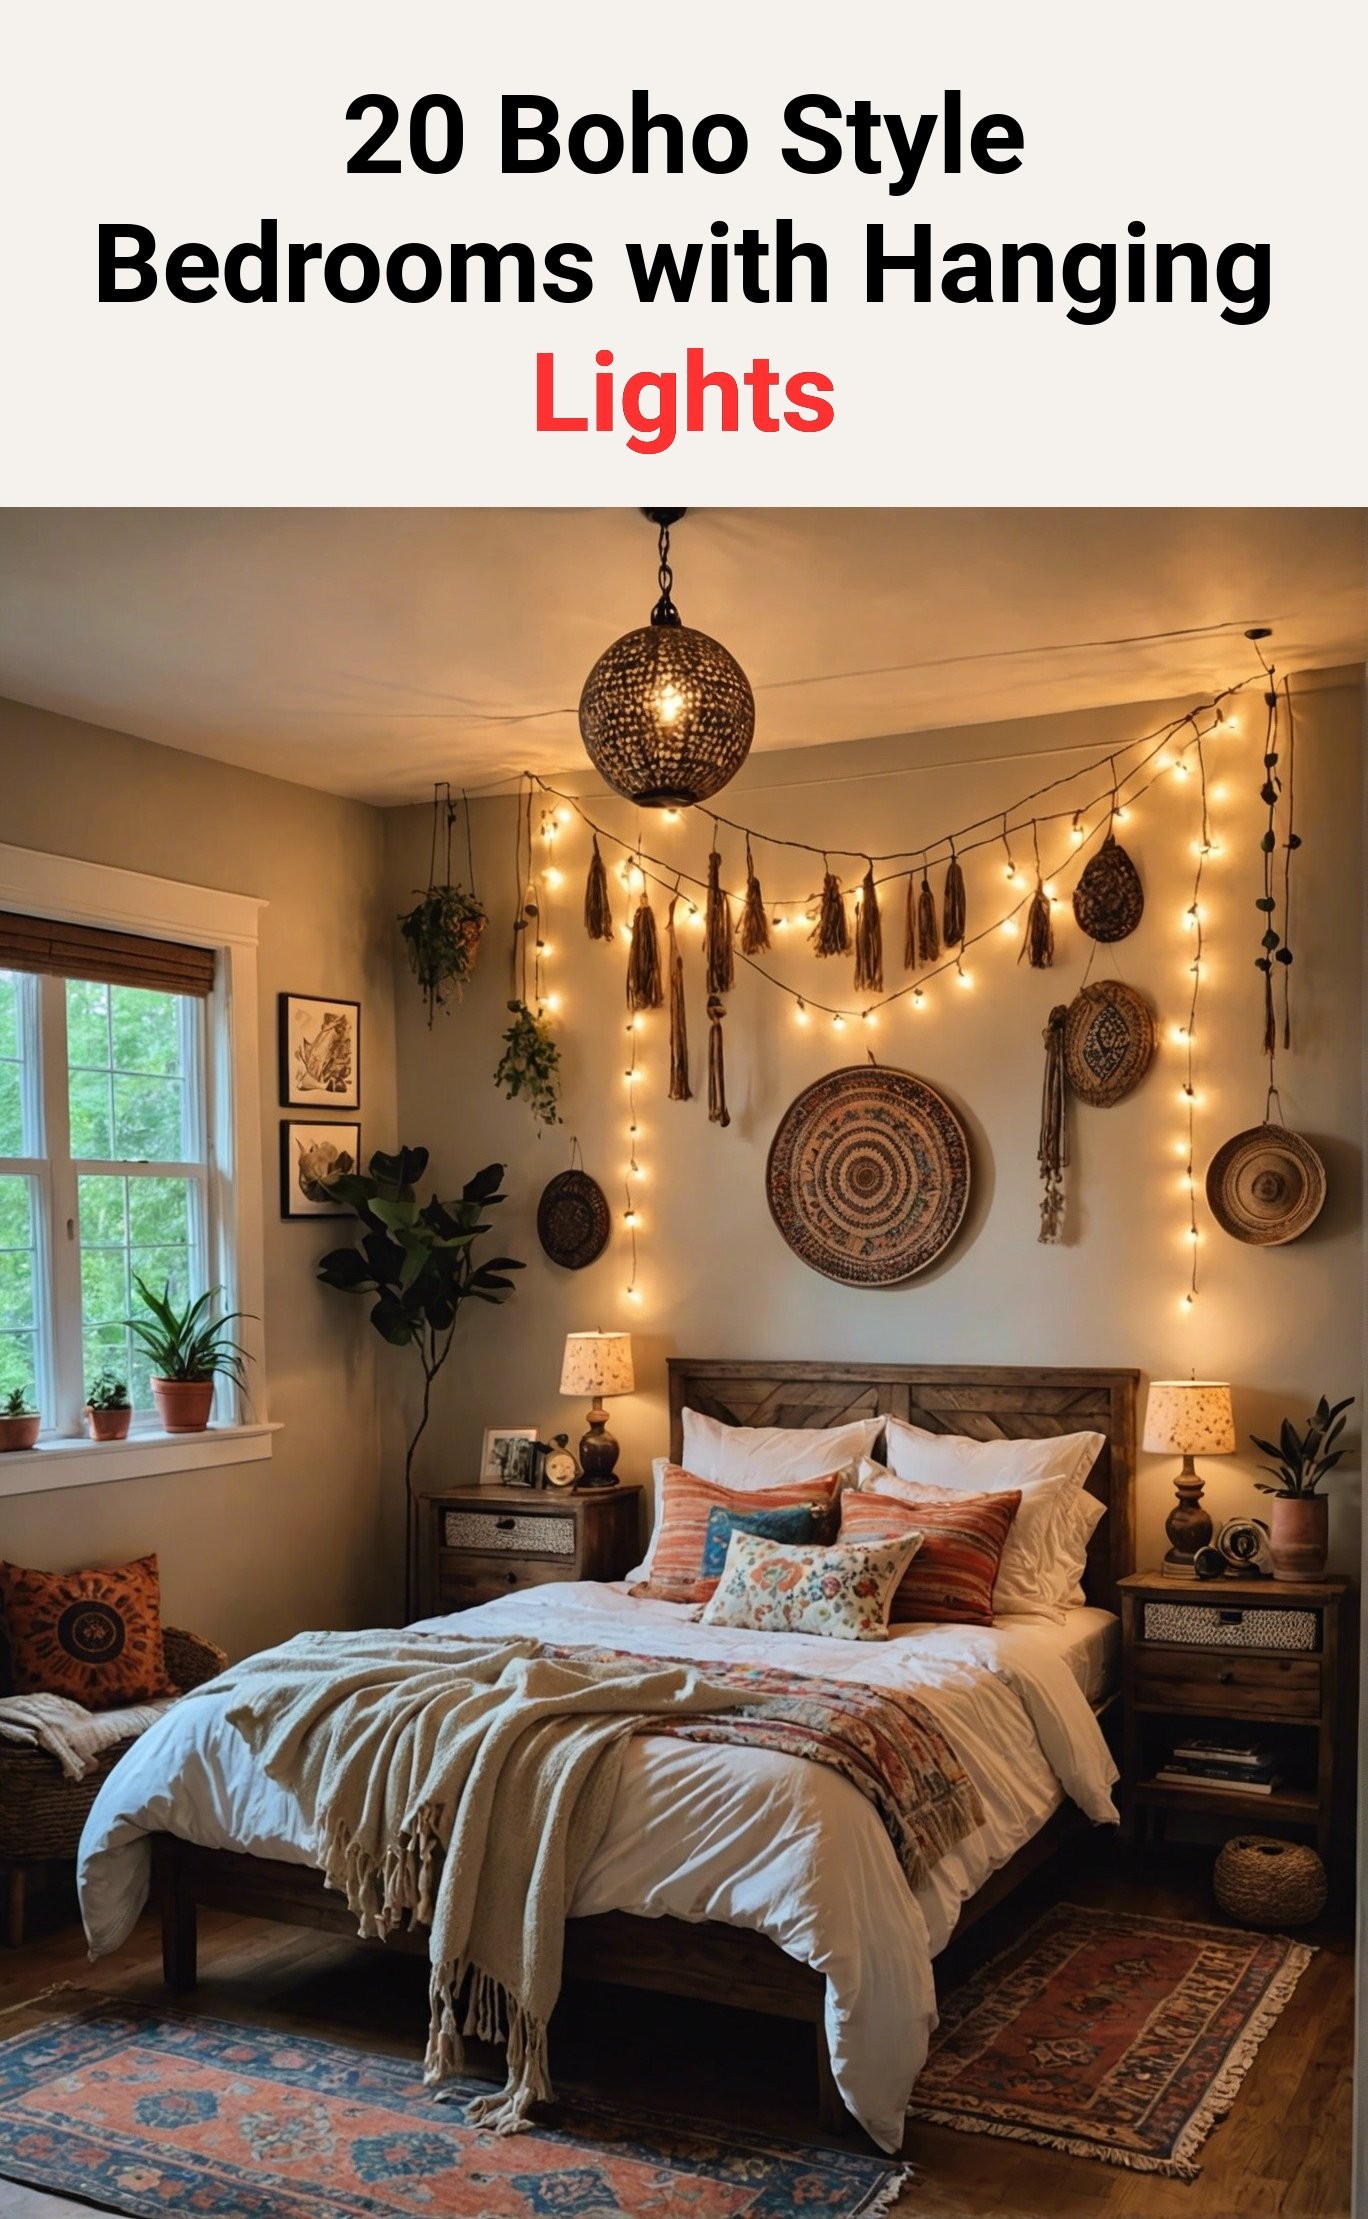 20 Boho Style Bedrooms with Hanging Lights